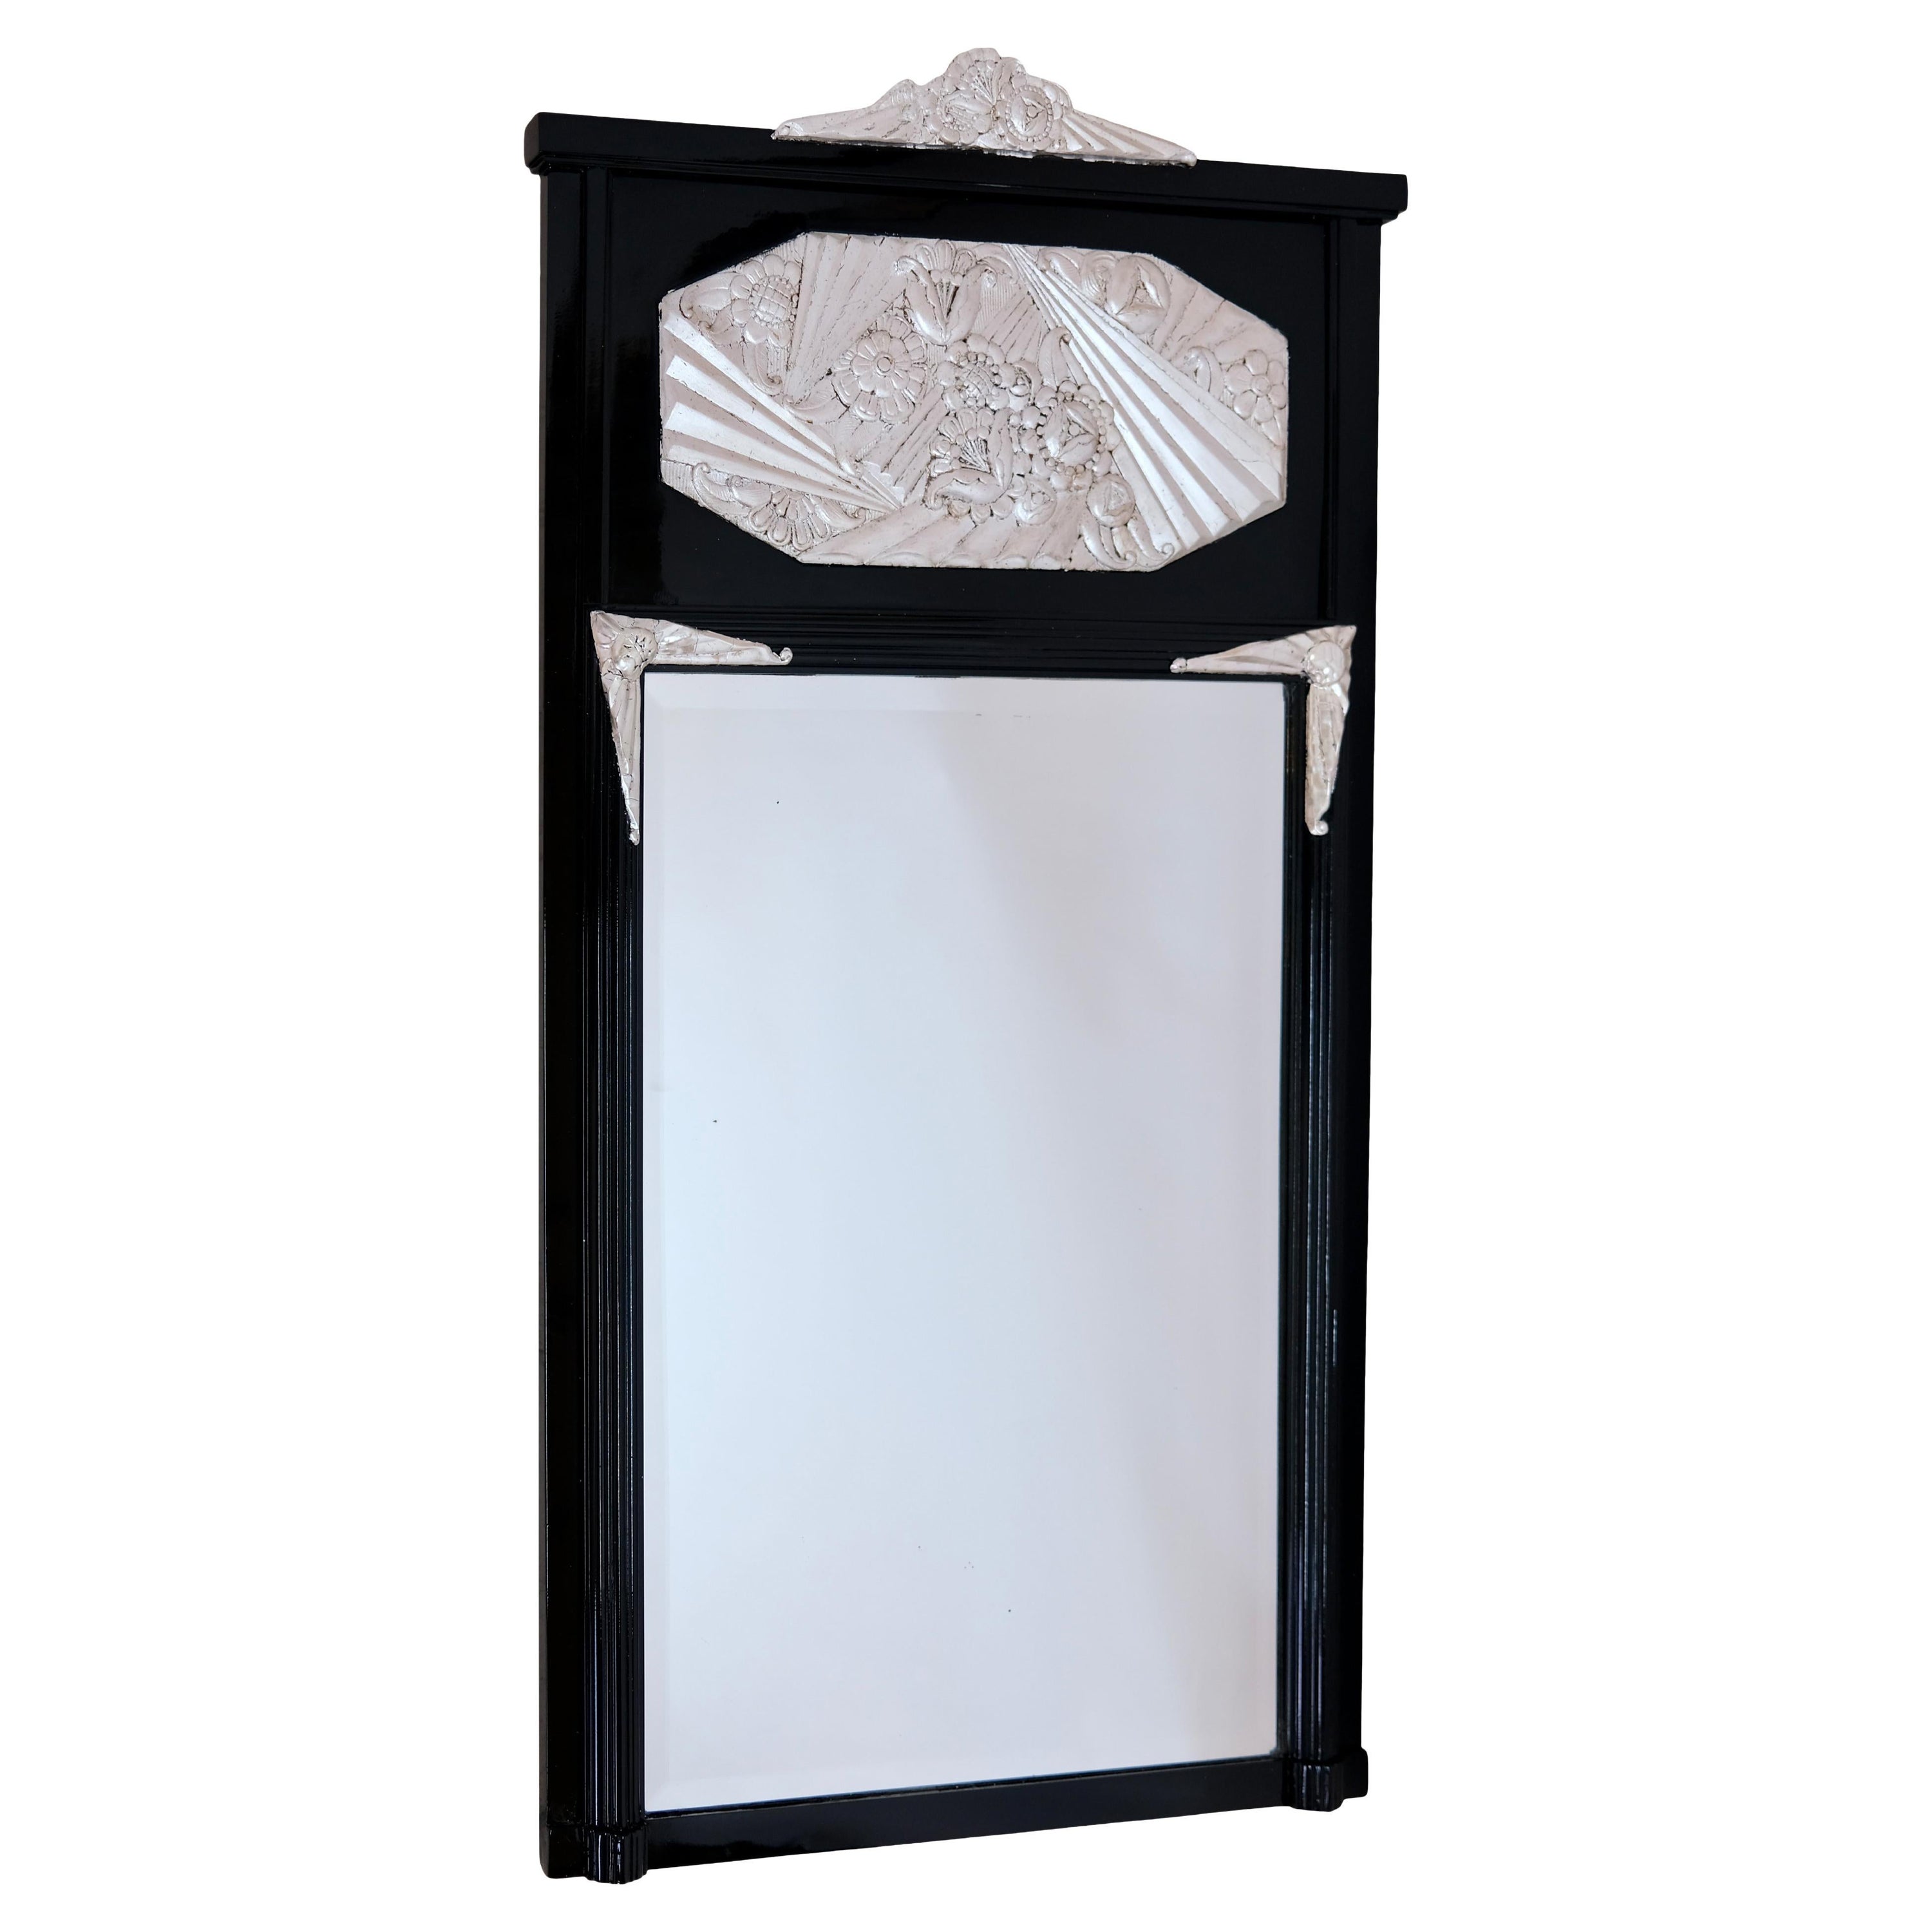 1930's Art Deco Wall Mirror in Black Lacquer with Silvered Art Deco Pattern For Sale